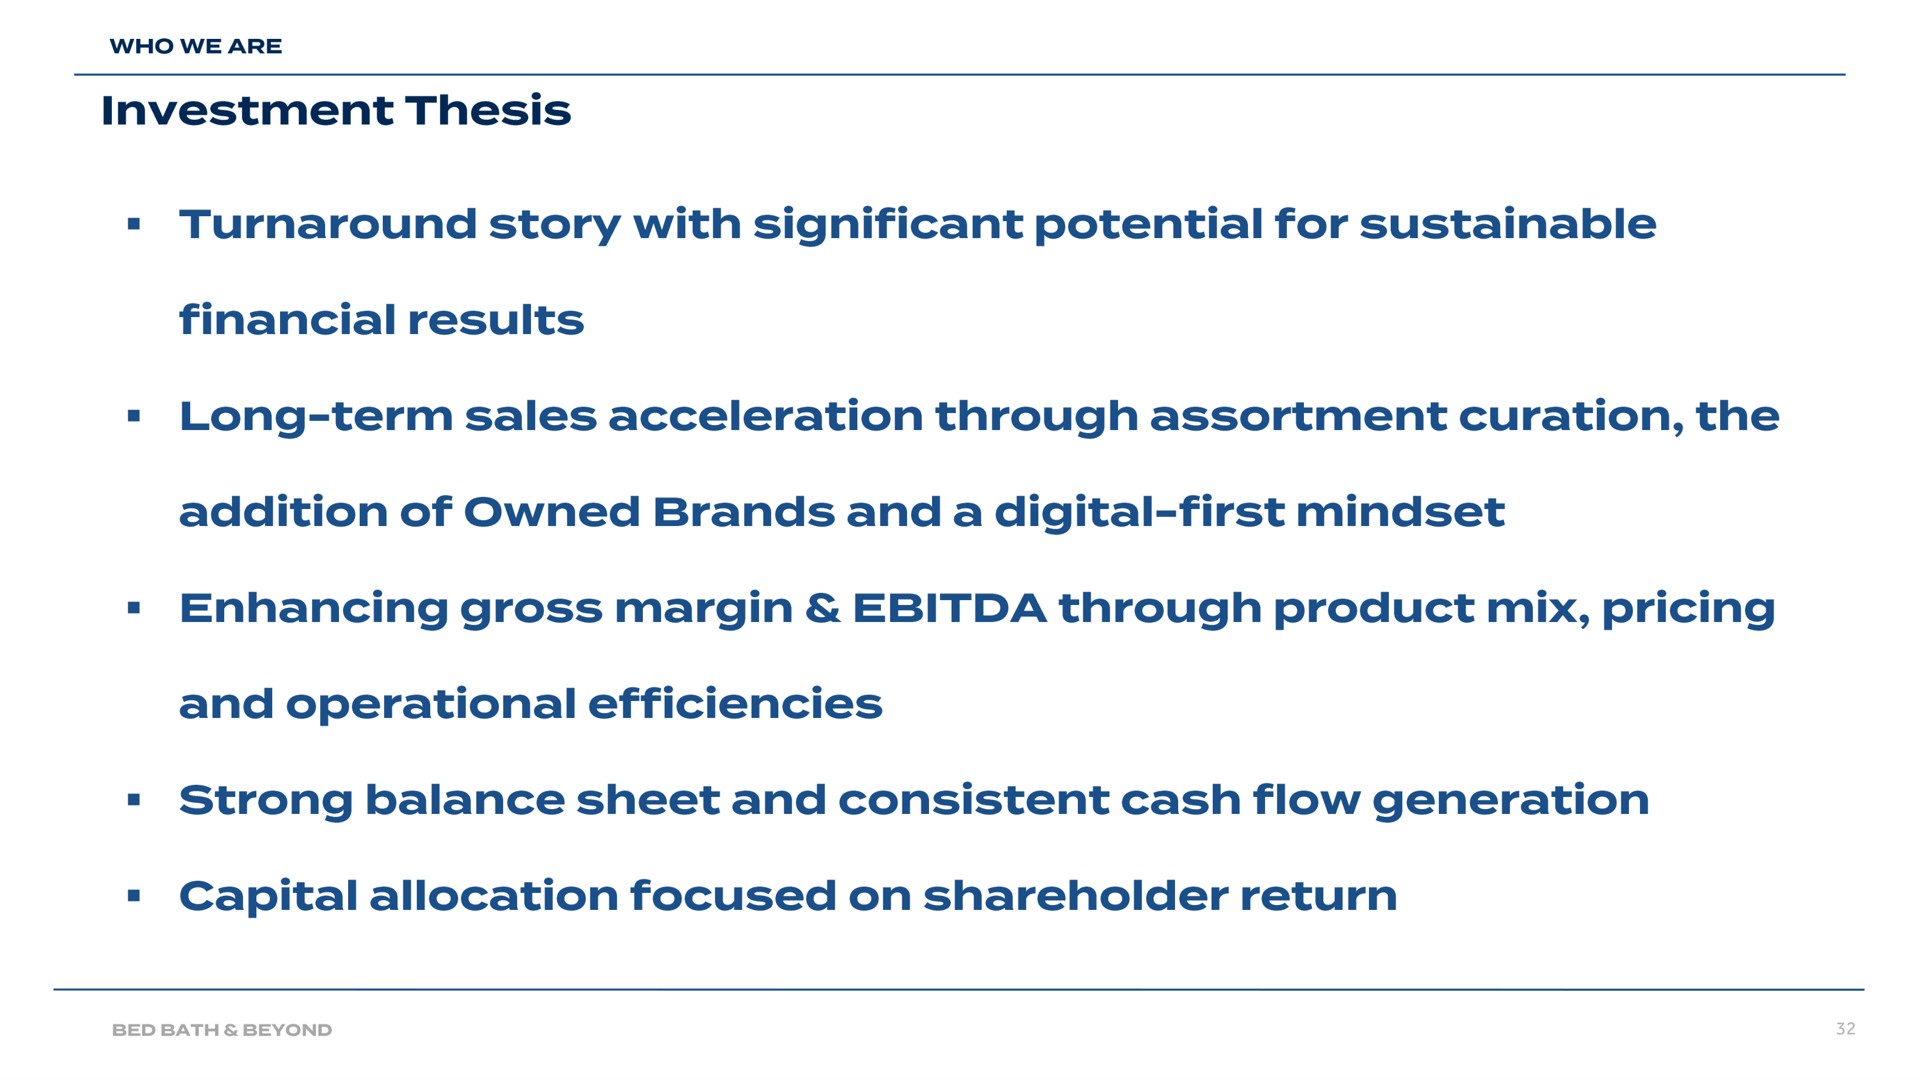 investment thesis turnaround story with significant potential for sustainable financial results long term sales acceleration through assortment curation the addition of owned brands and a digital first enhancing gross margin through product mix pricing and operational efficiencies strong balance sheet and consistent cash flow generation capital allocation focused on shareholder return | Bed Bath & Beyond